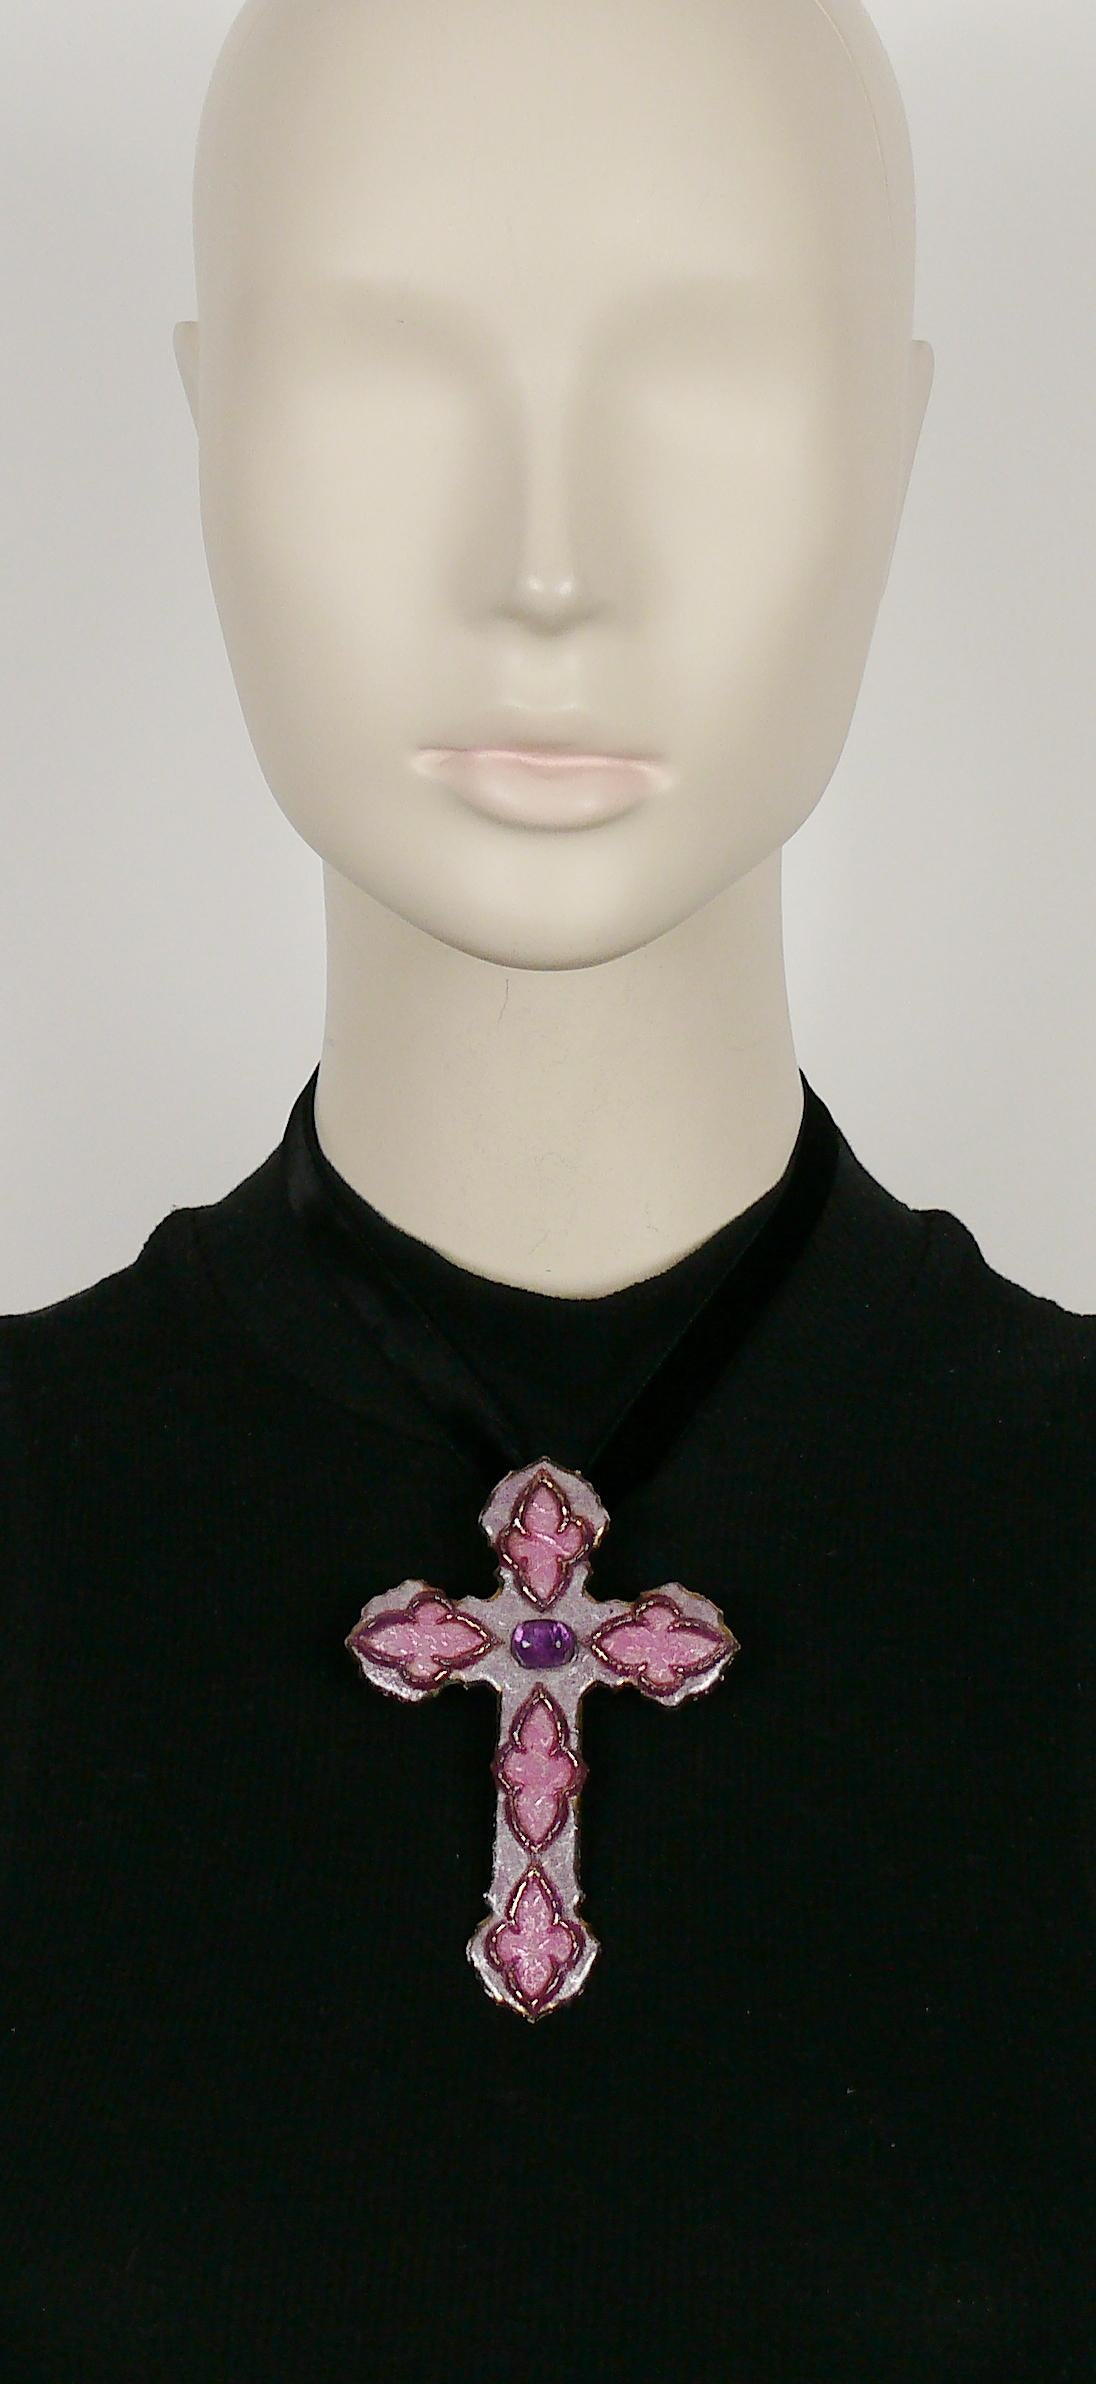 ANDREE BAZOT vintage Medieval inspired cross pendant featuring pink shade enamel and glass cabochon at center.

Comes attached to a black velvet ribbon (possible to remove it).

Signed ANDREE BAZOT.

Indicative measurements : cross max. height